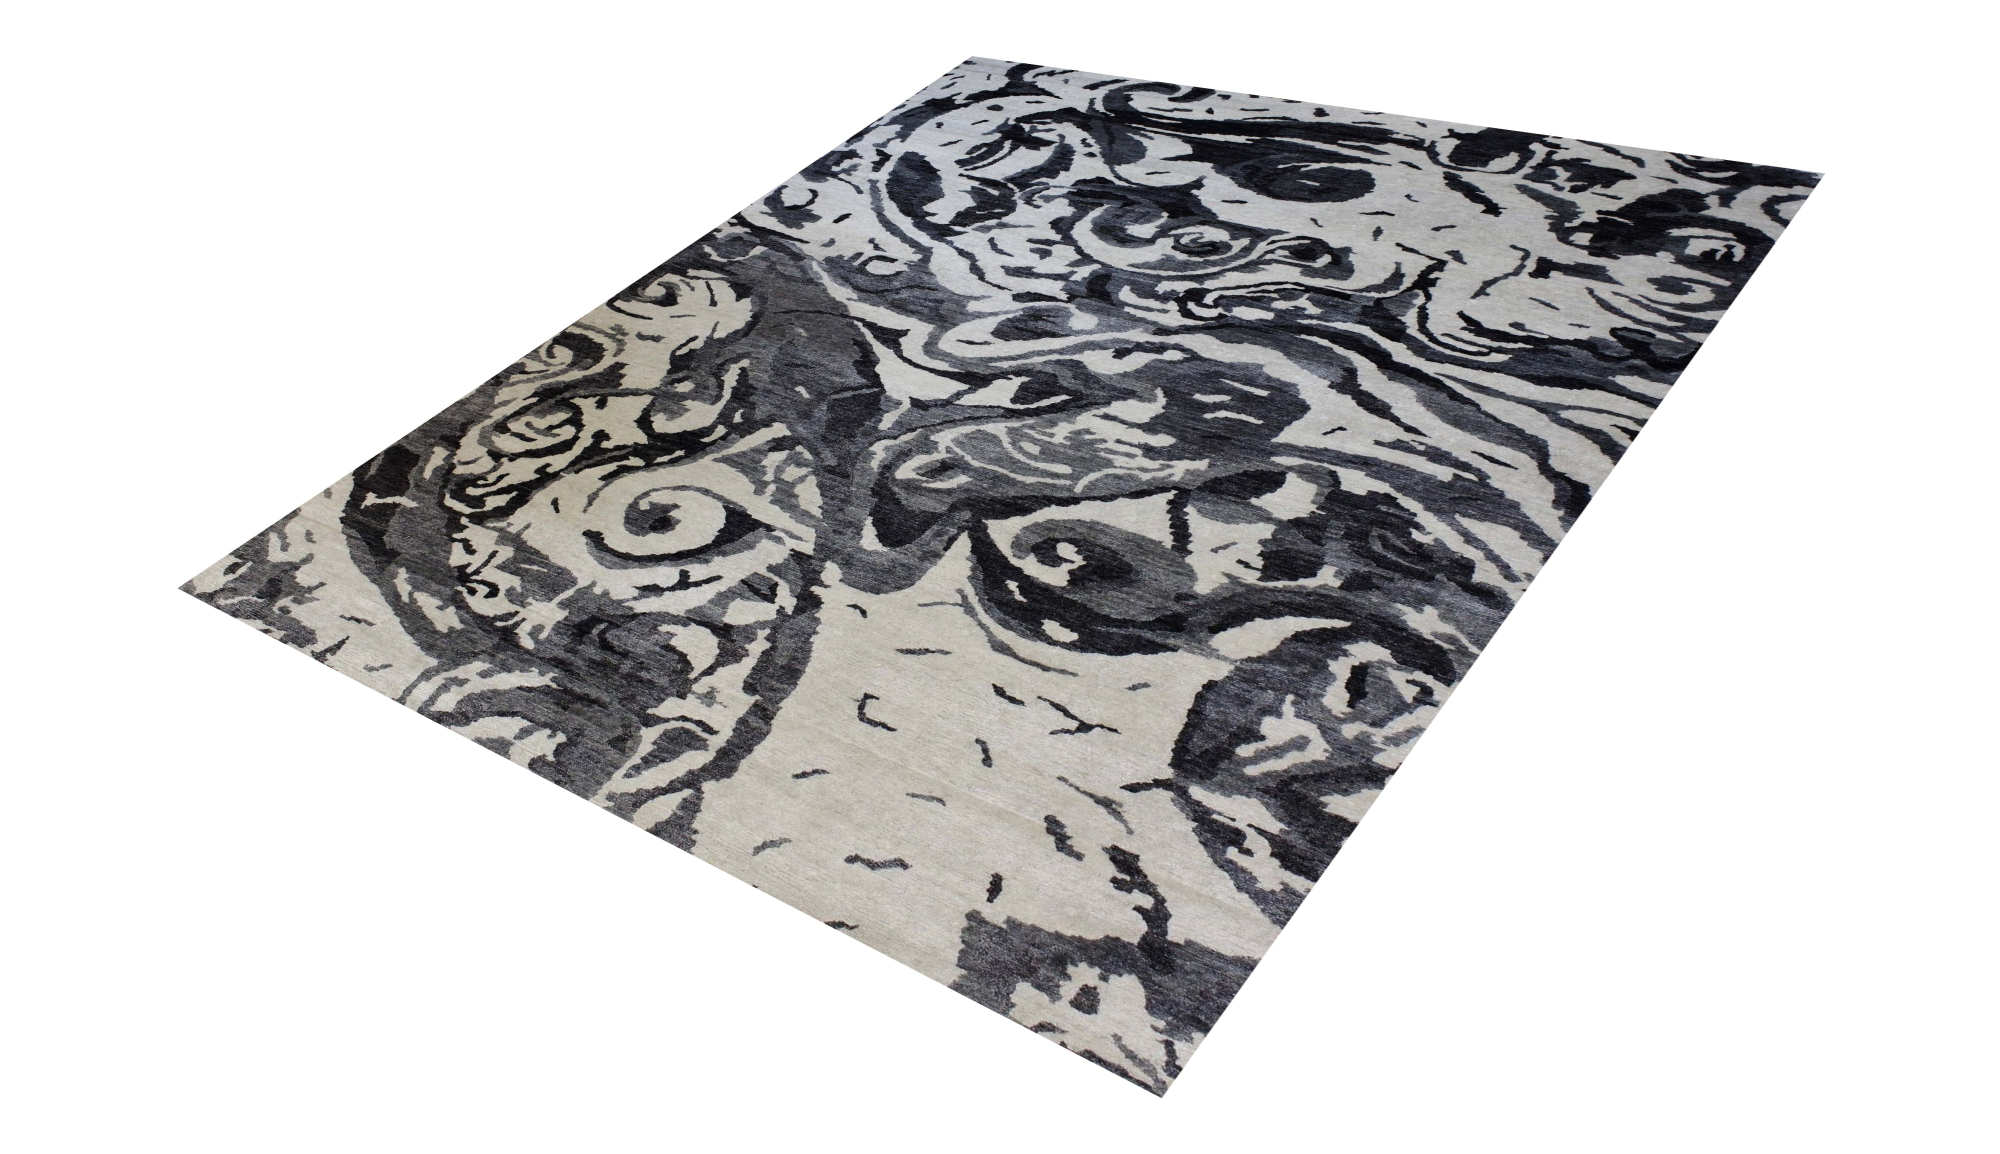 Area rug for living space and any room. Floor decor, rugs and carpets from Tabrizi Rugs. Fine Art 1172 - Multiple Sizes. Canada's most trusted website to buy rugs online.